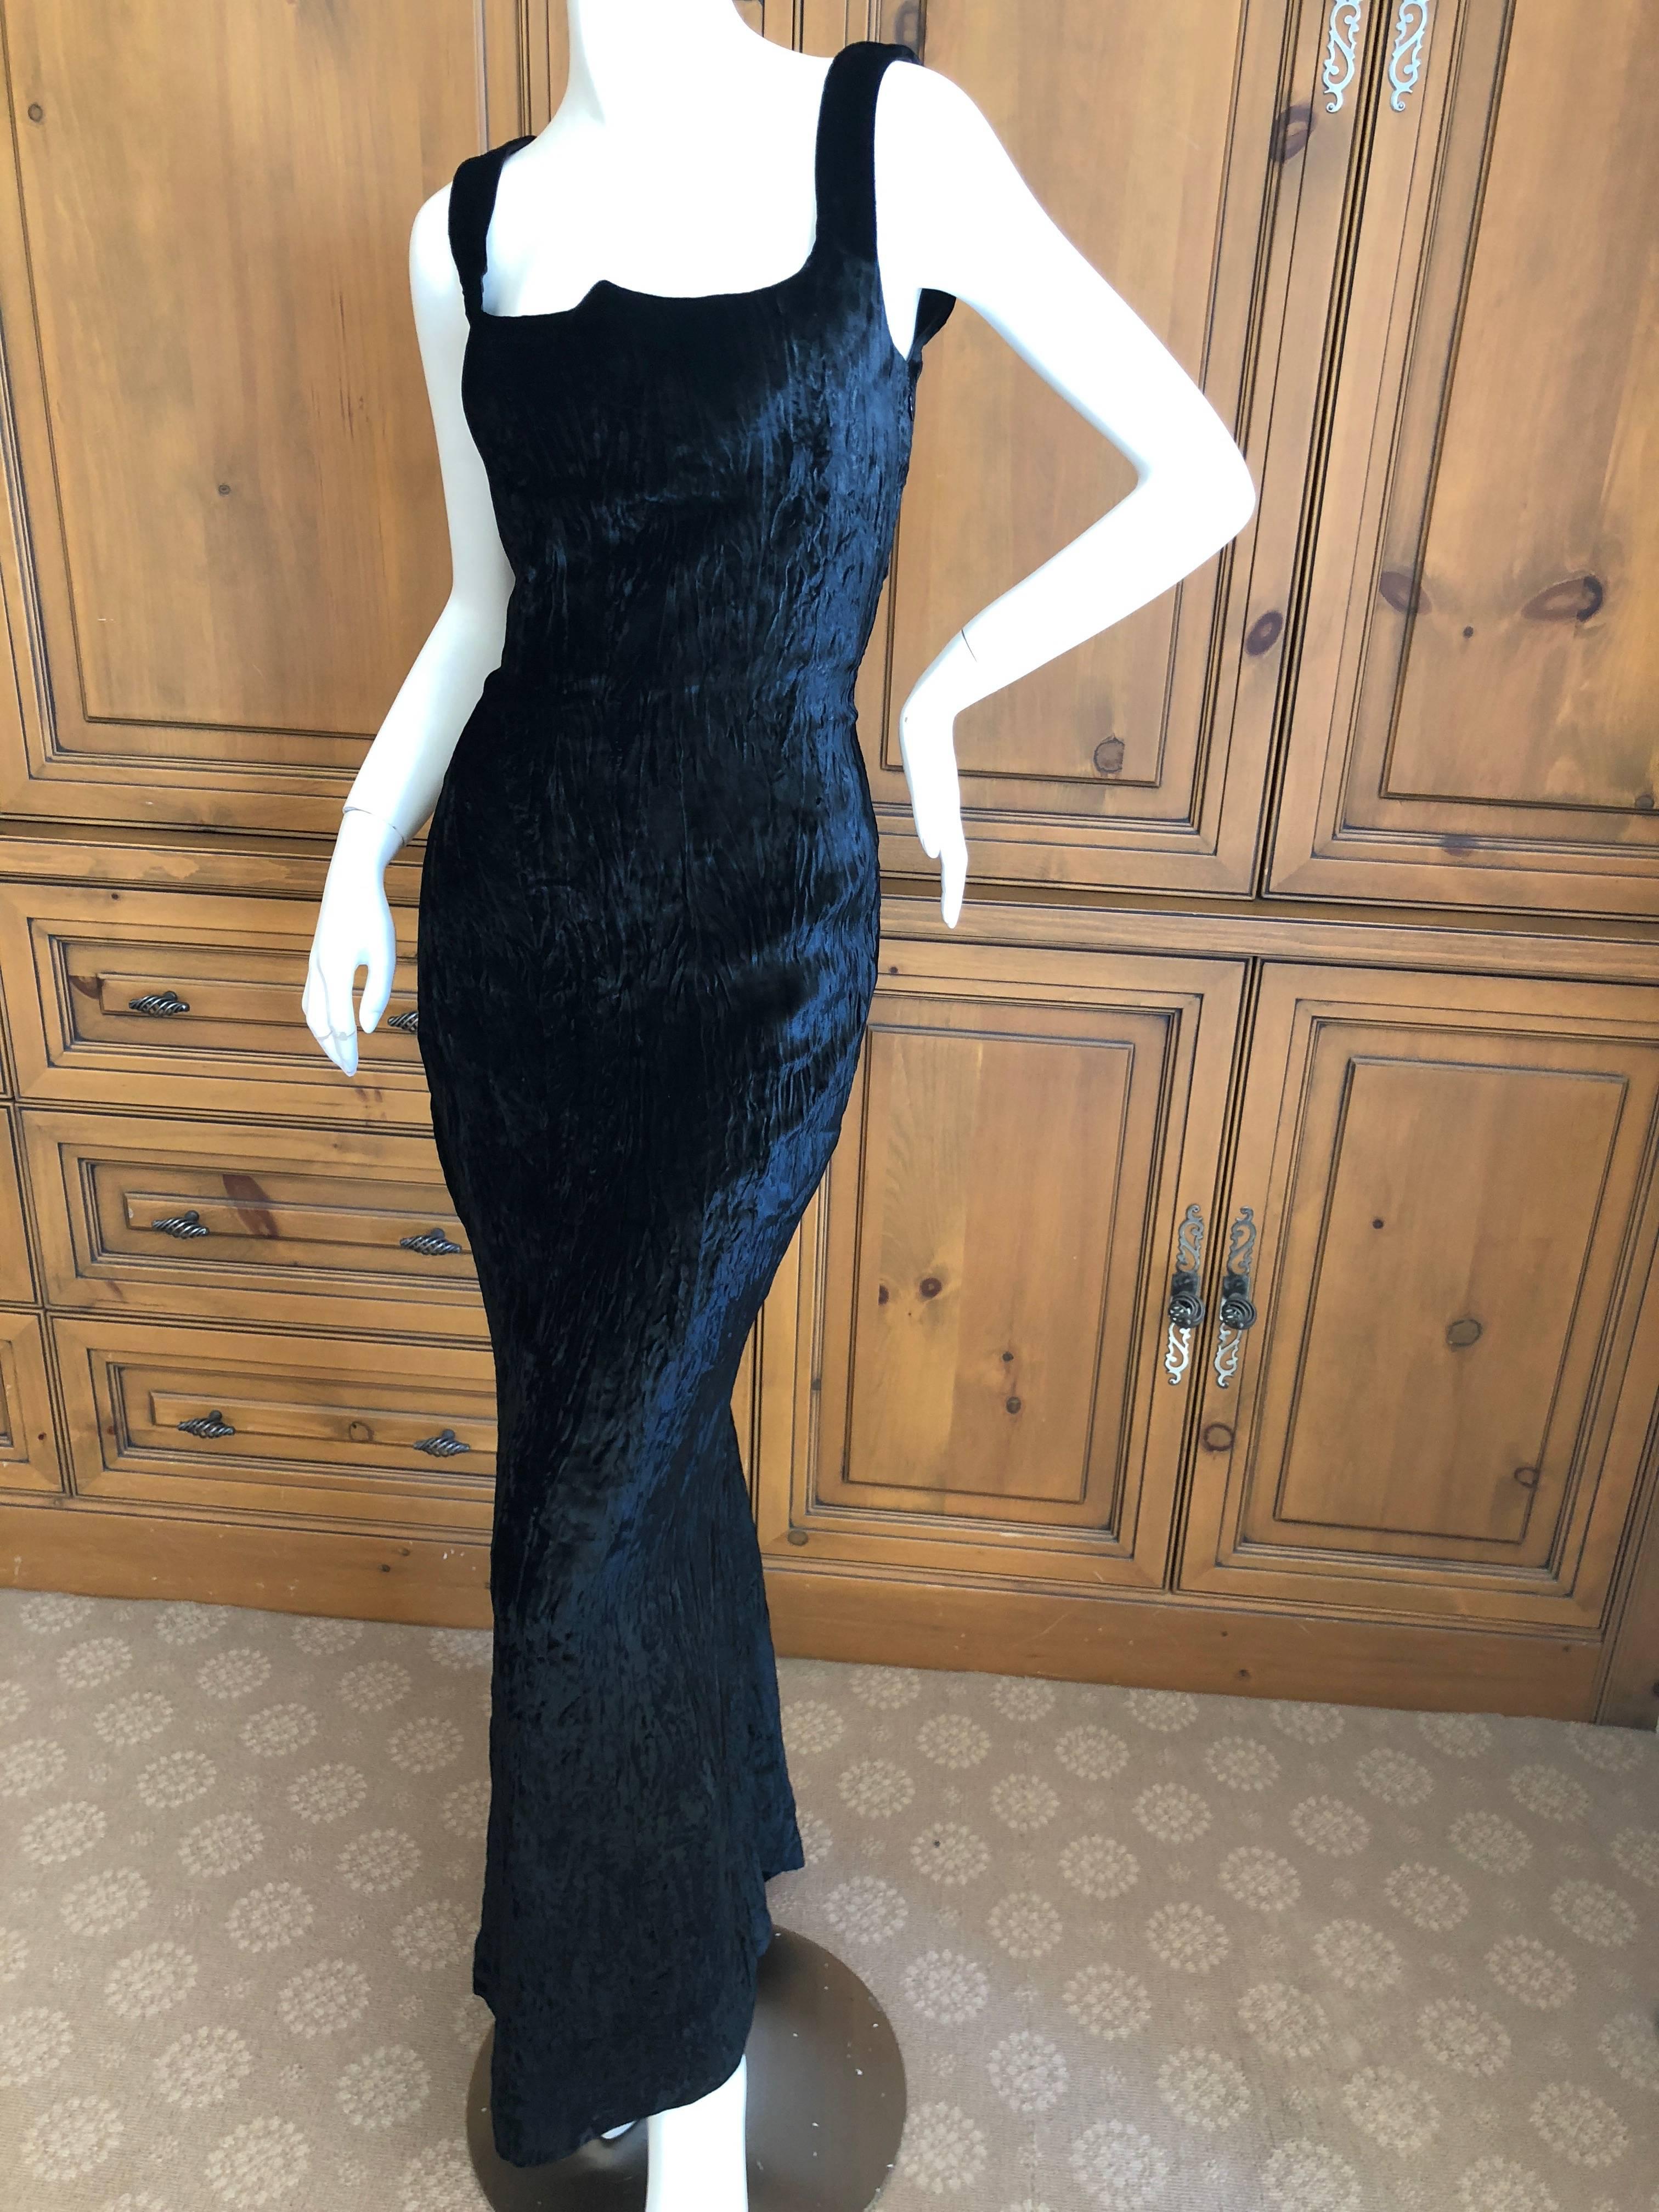 Gianni Versace Couture Vintage 1989 Textured Black Velvet  Evening Dress In Excellent Condition For Sale In Cloverdale, CA